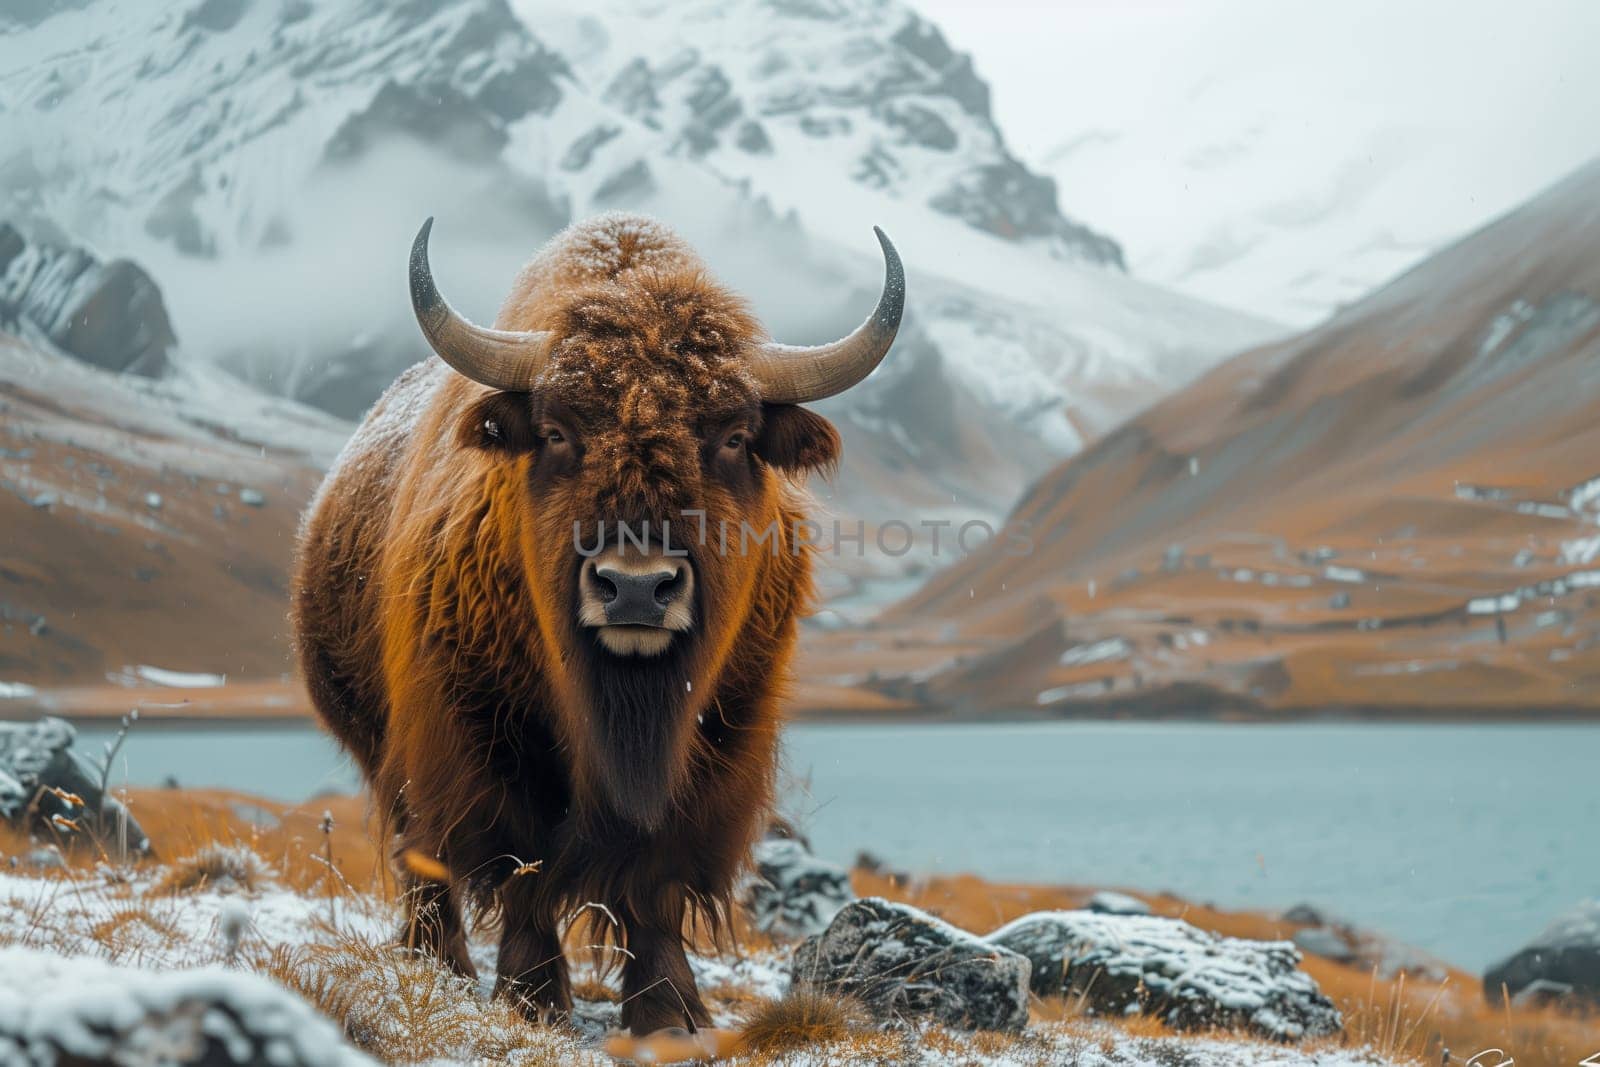 A bull, a terrestrial animal with horns and a powerful snout, is standing by a lake in a snowy natural landscape surrounded by mountains